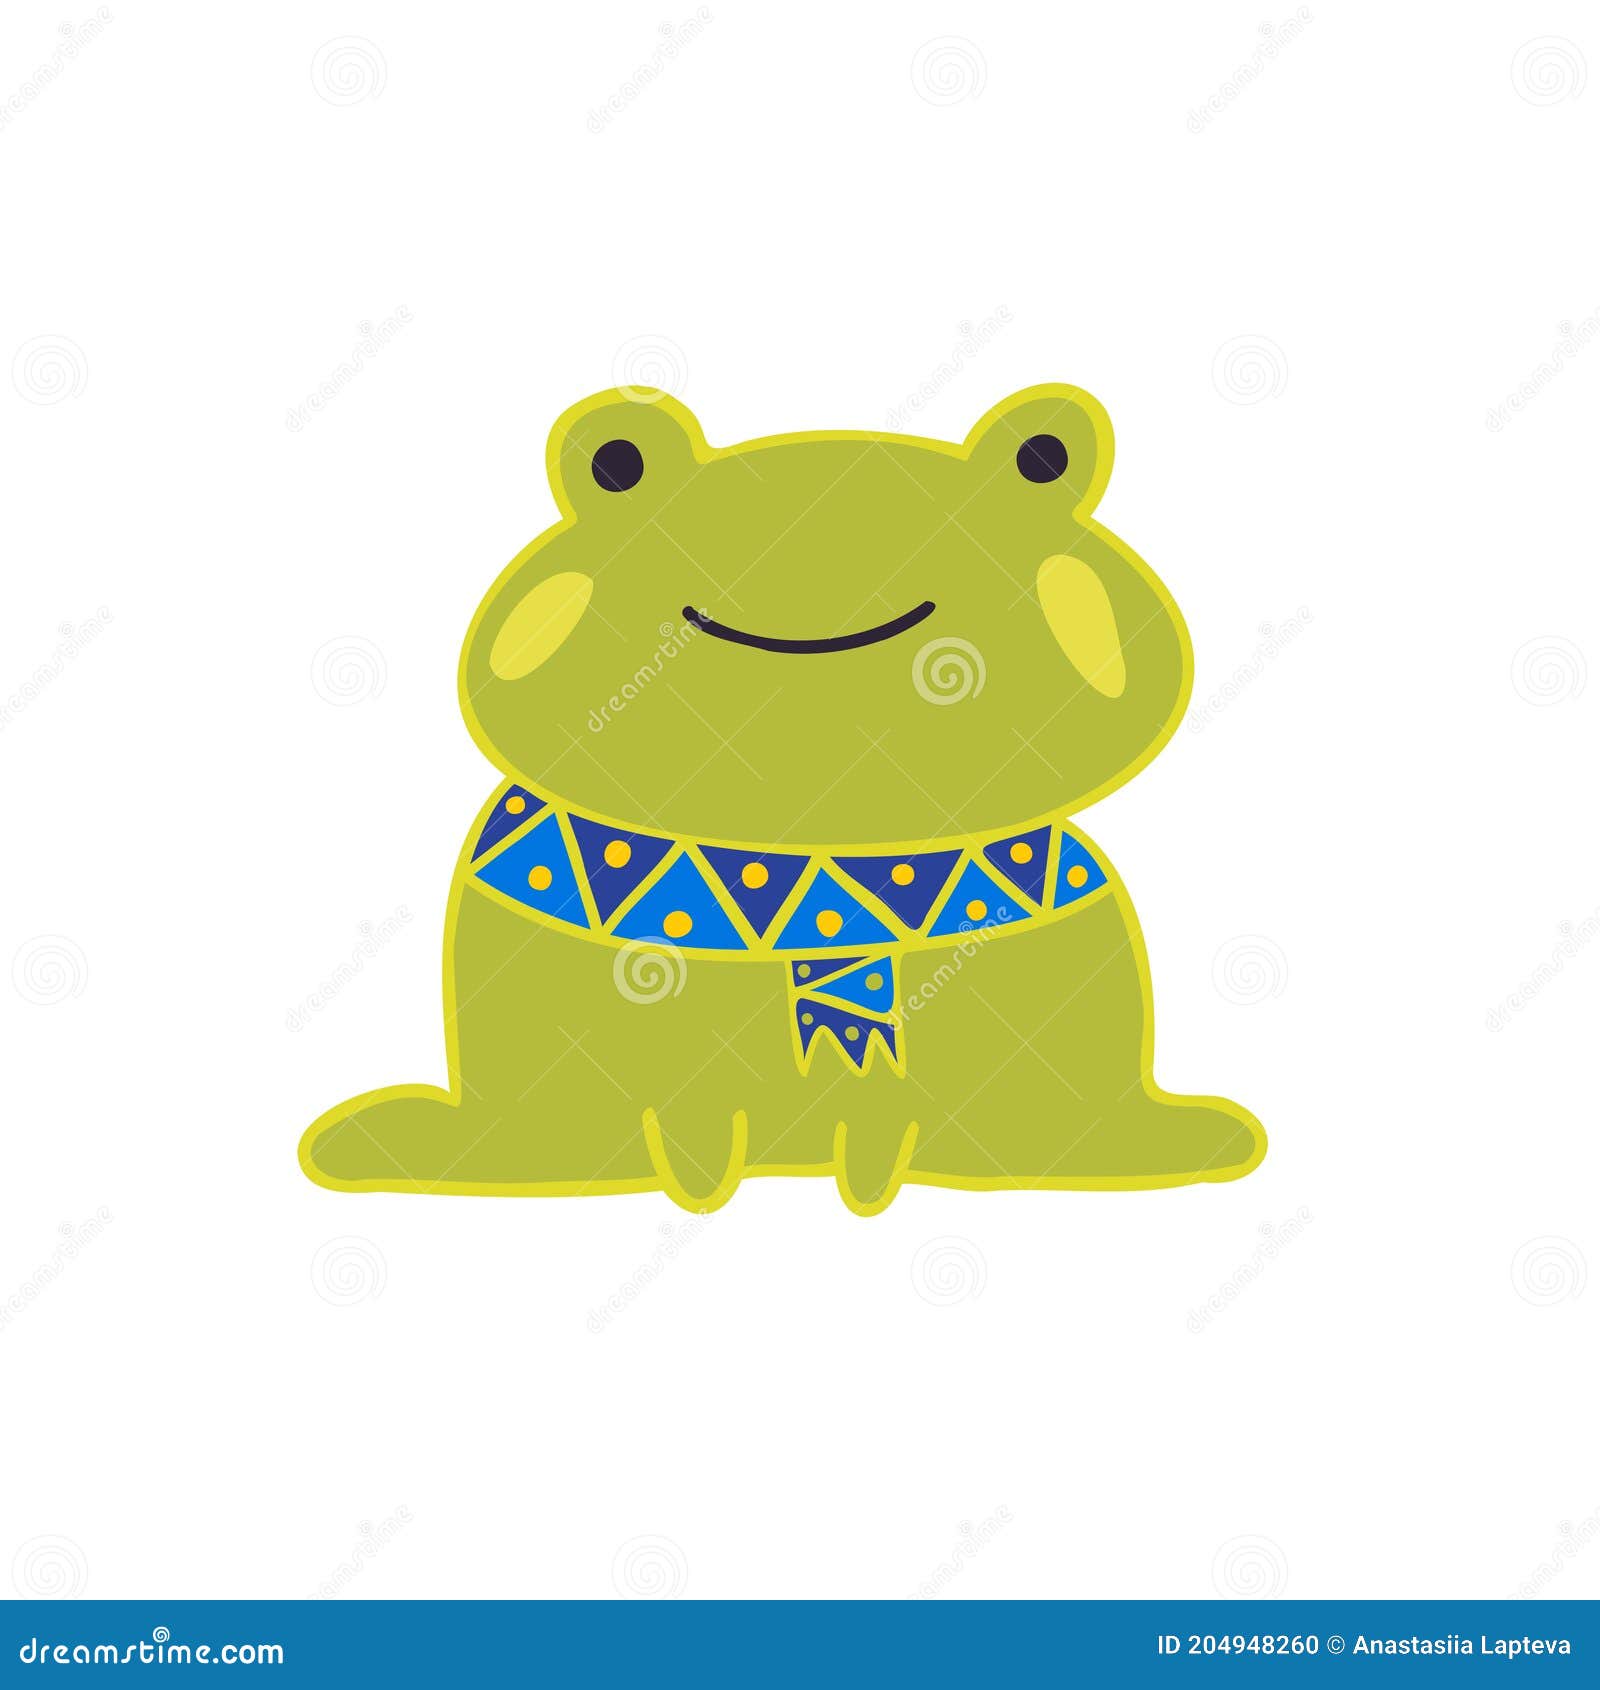 Isolated Vector Colorful Illustration of Adorable Cartoon Green Frog ...